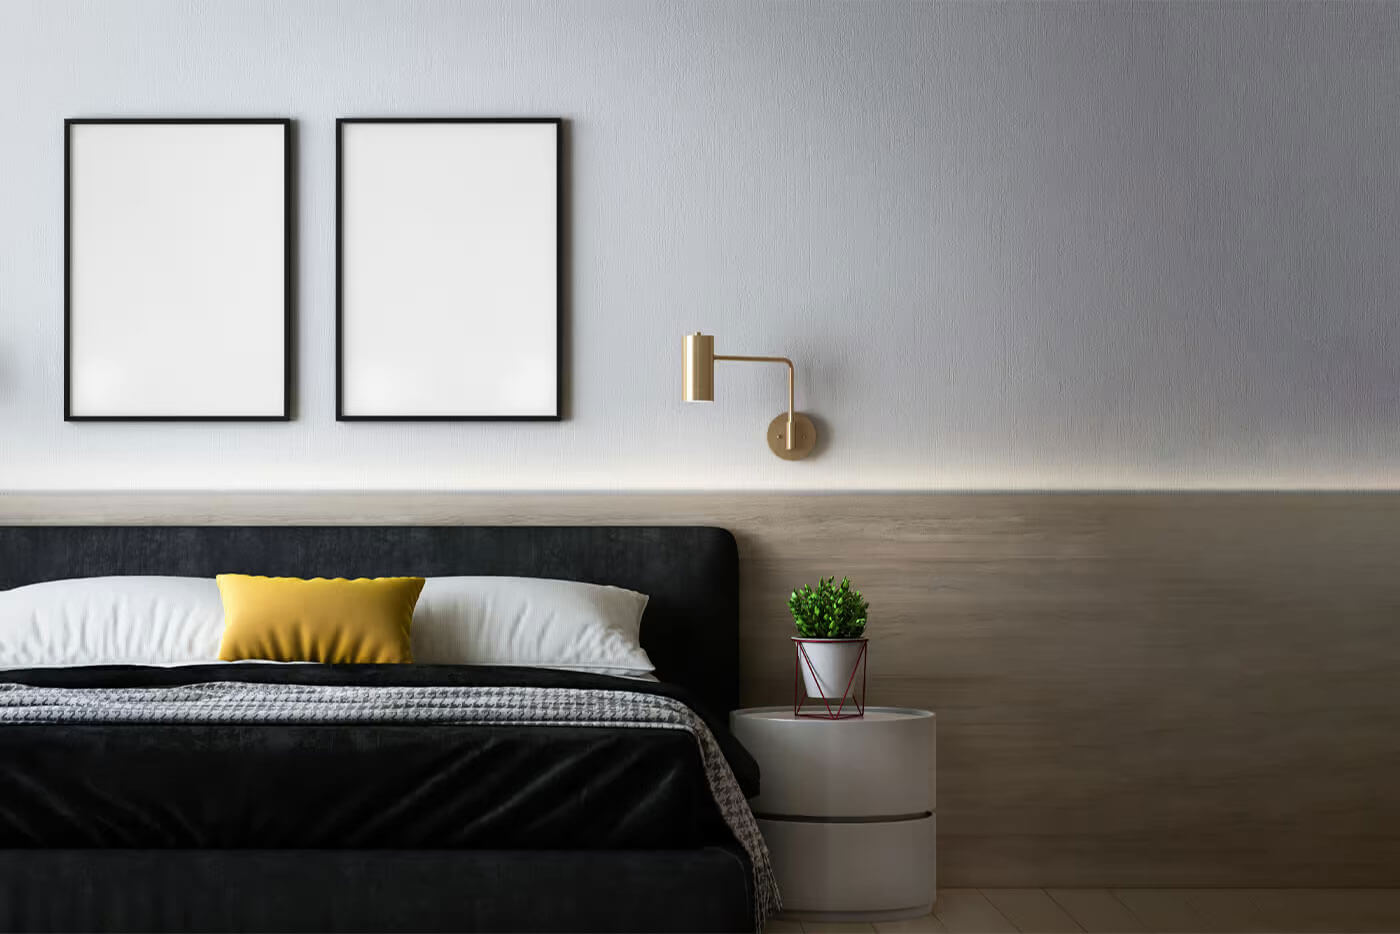 Free Two Posters in Bedroom Mockup